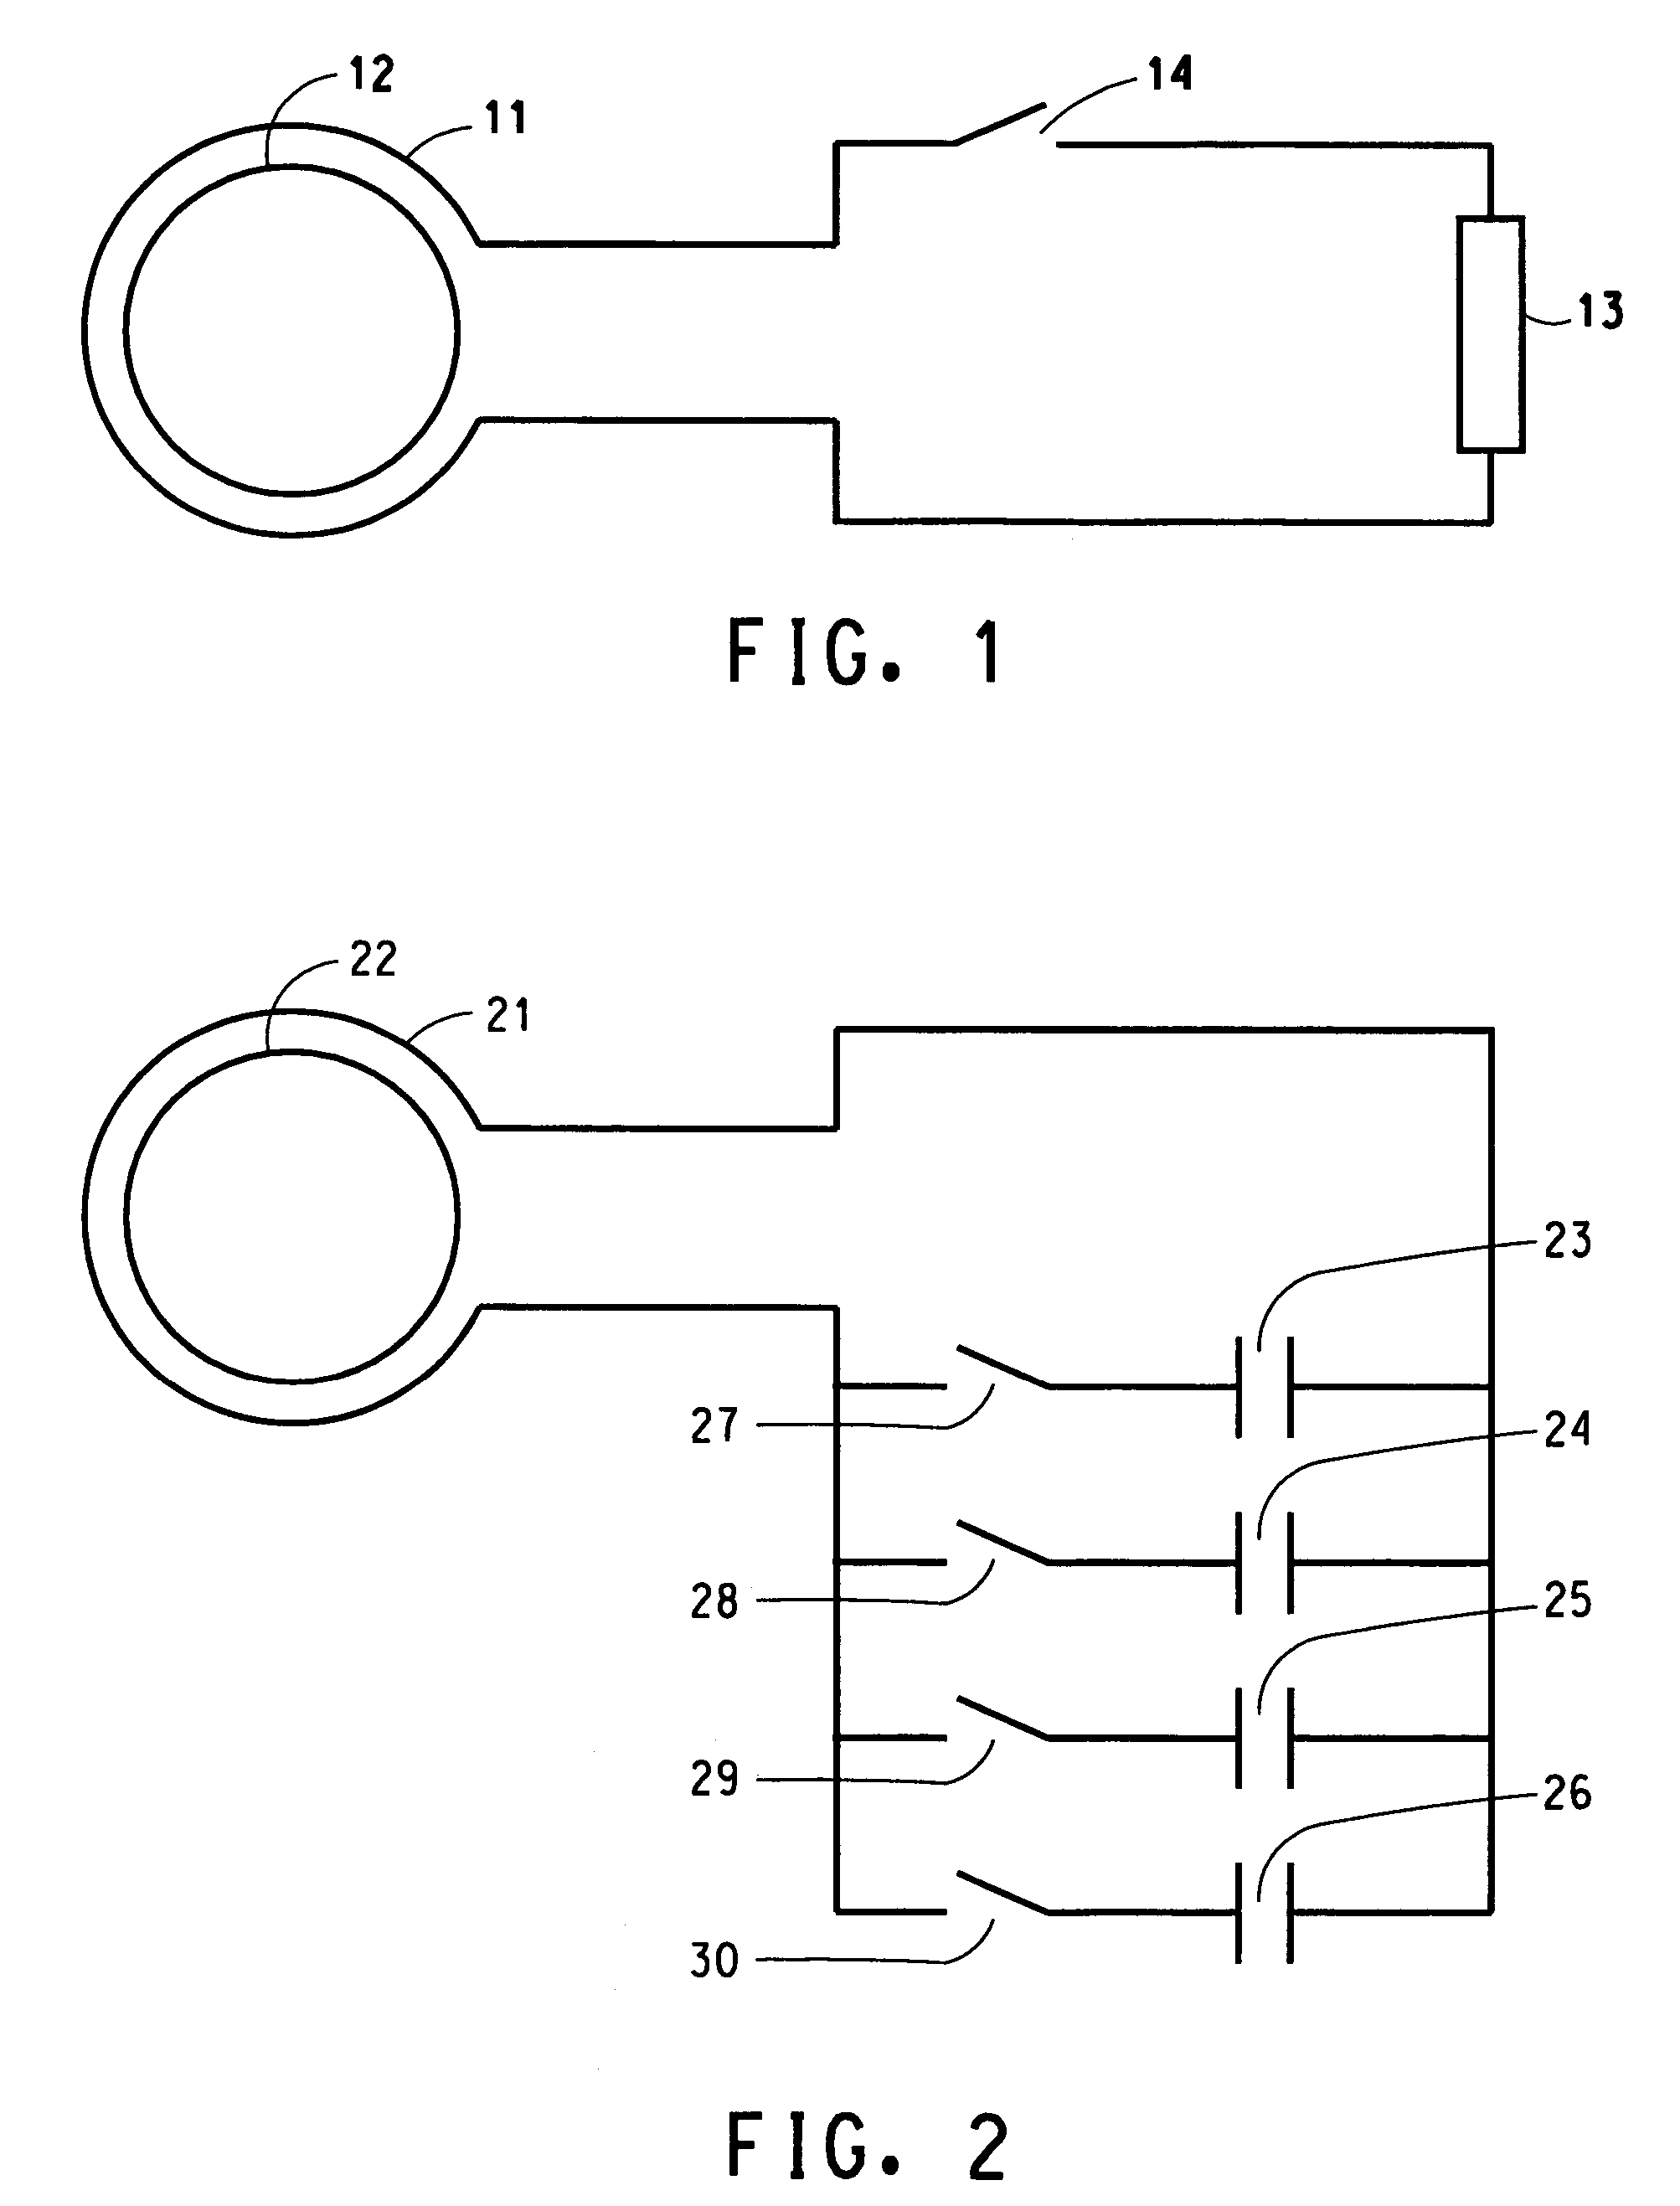 Frequency detection system comprising circuitry for adjusting the resonance frequency of a high temperature superconductor self-resonant coil